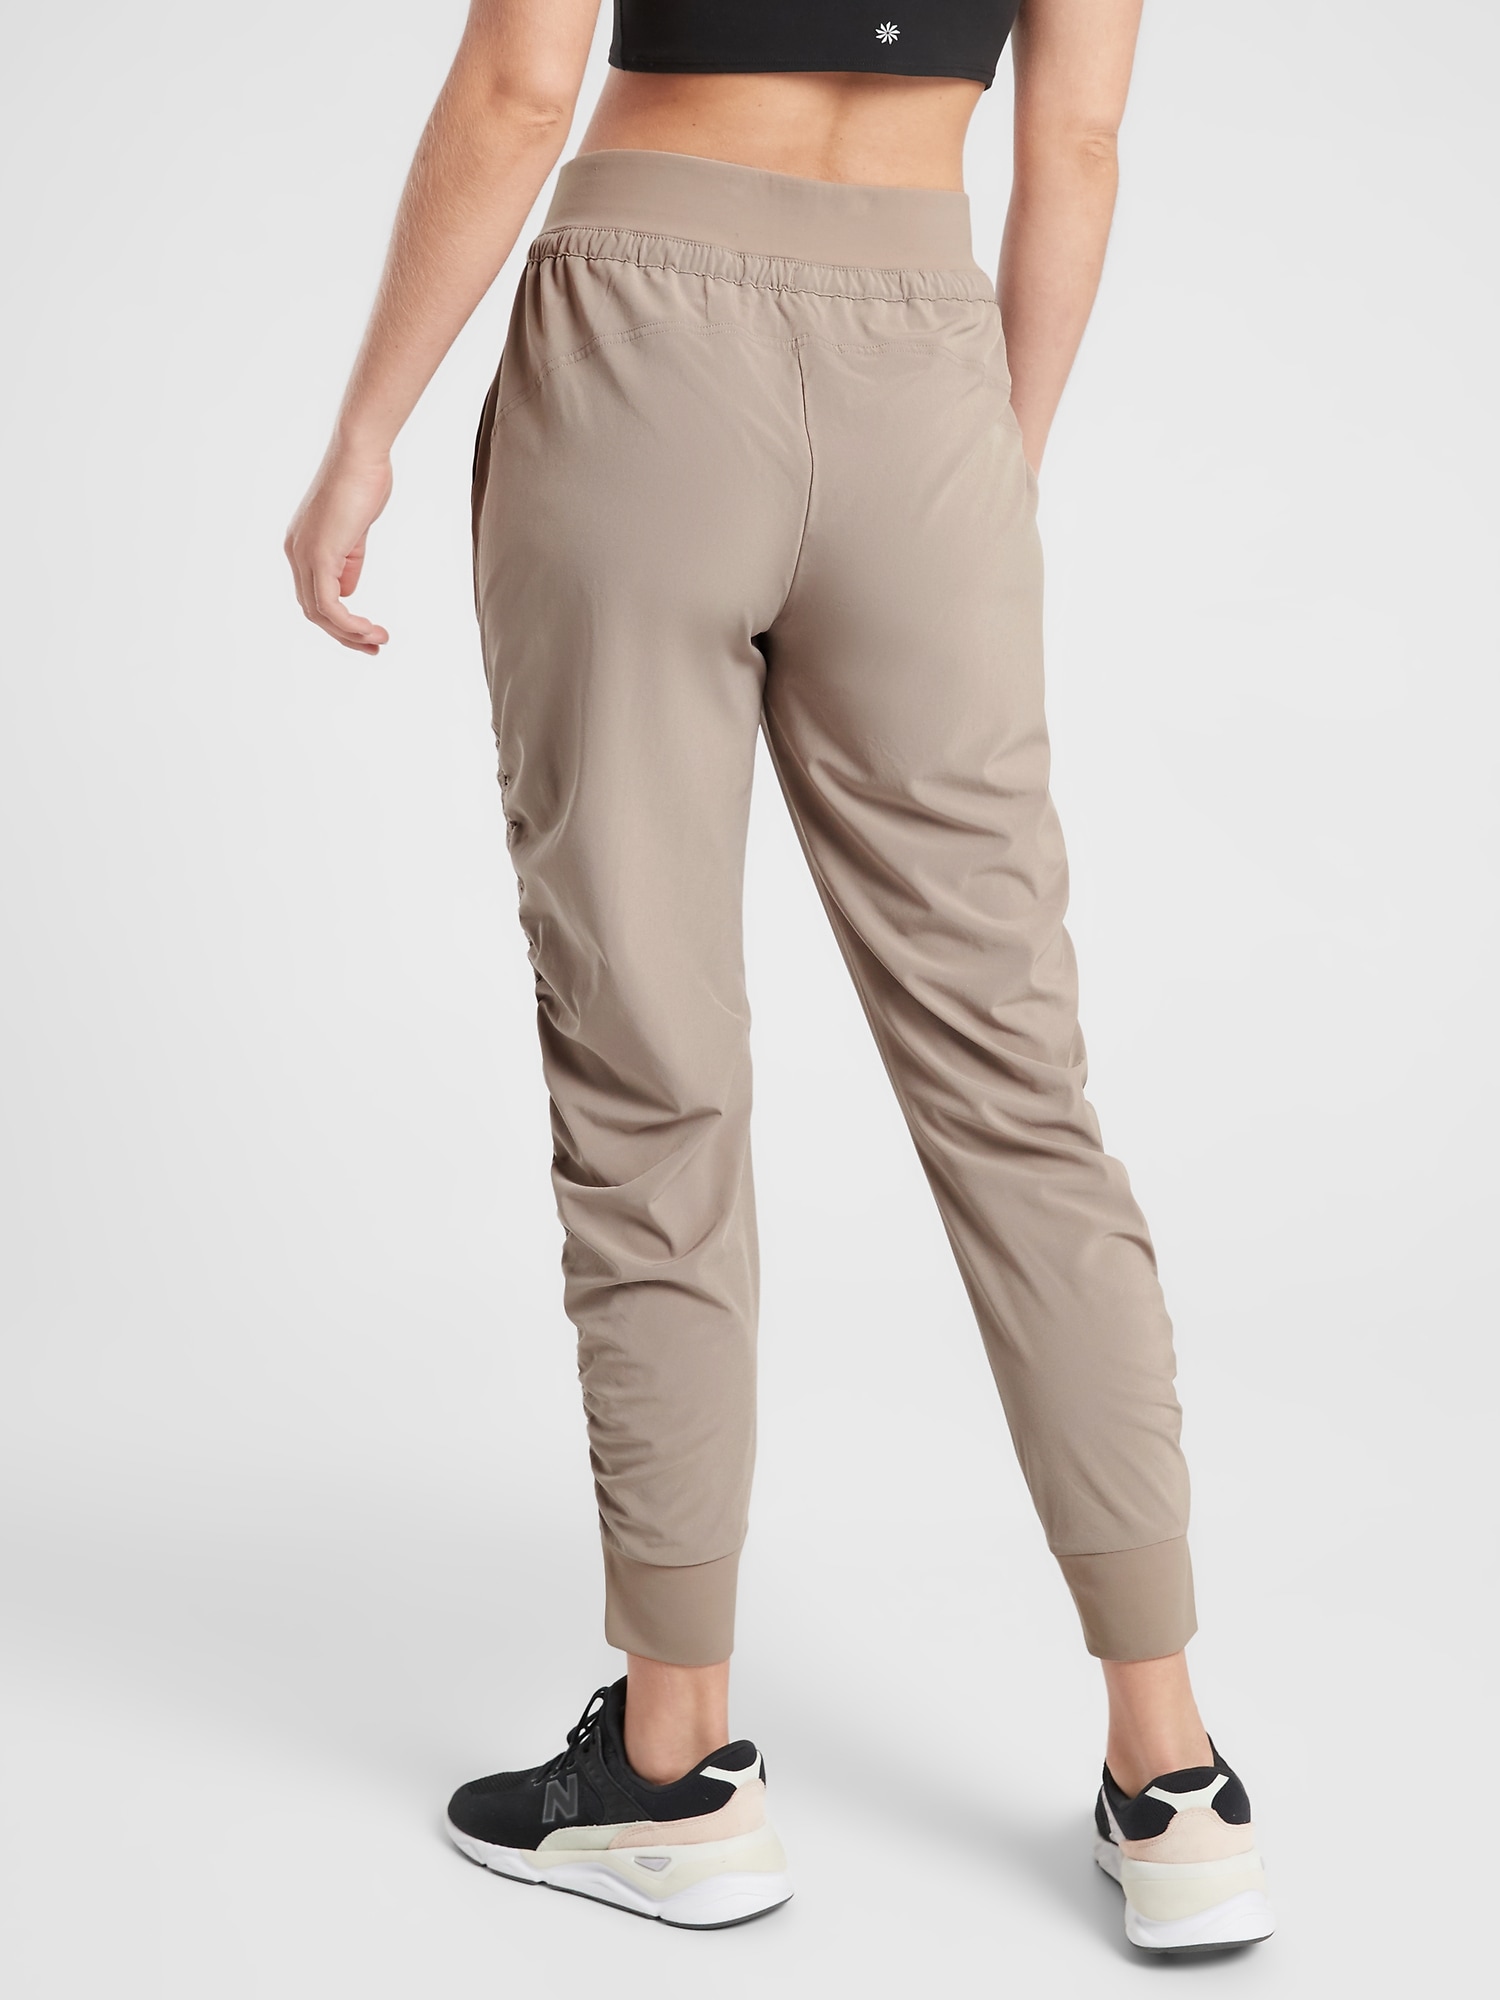 Attitude Lined Pant